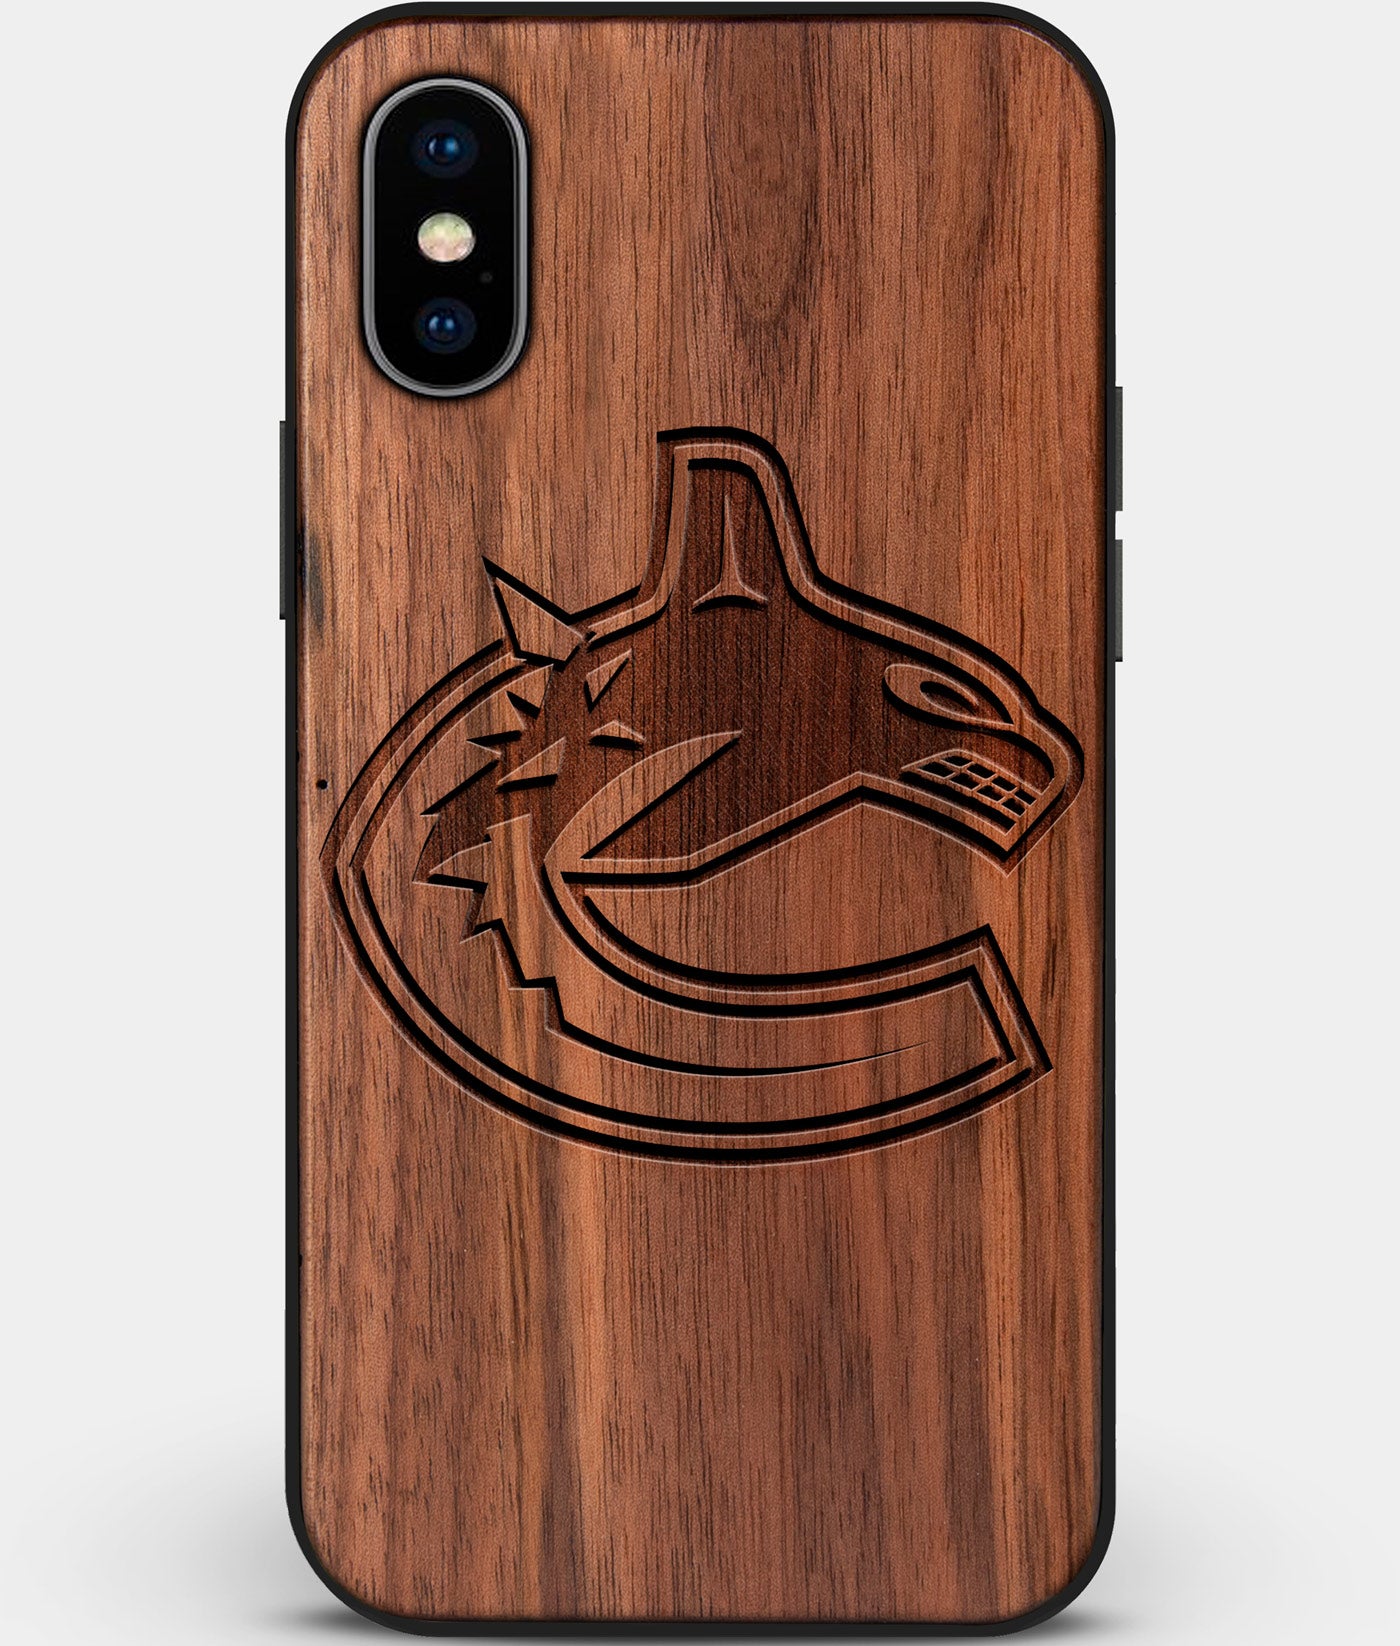 Custom Carved Wood Vancouver Canucks iPhone X/XS Case | Personalized Walnut Wood Vancouver Canucks Cover, Birthday Gift, Gifts For Him, Monogrammed Gift For Fan | by Engraved In Nature